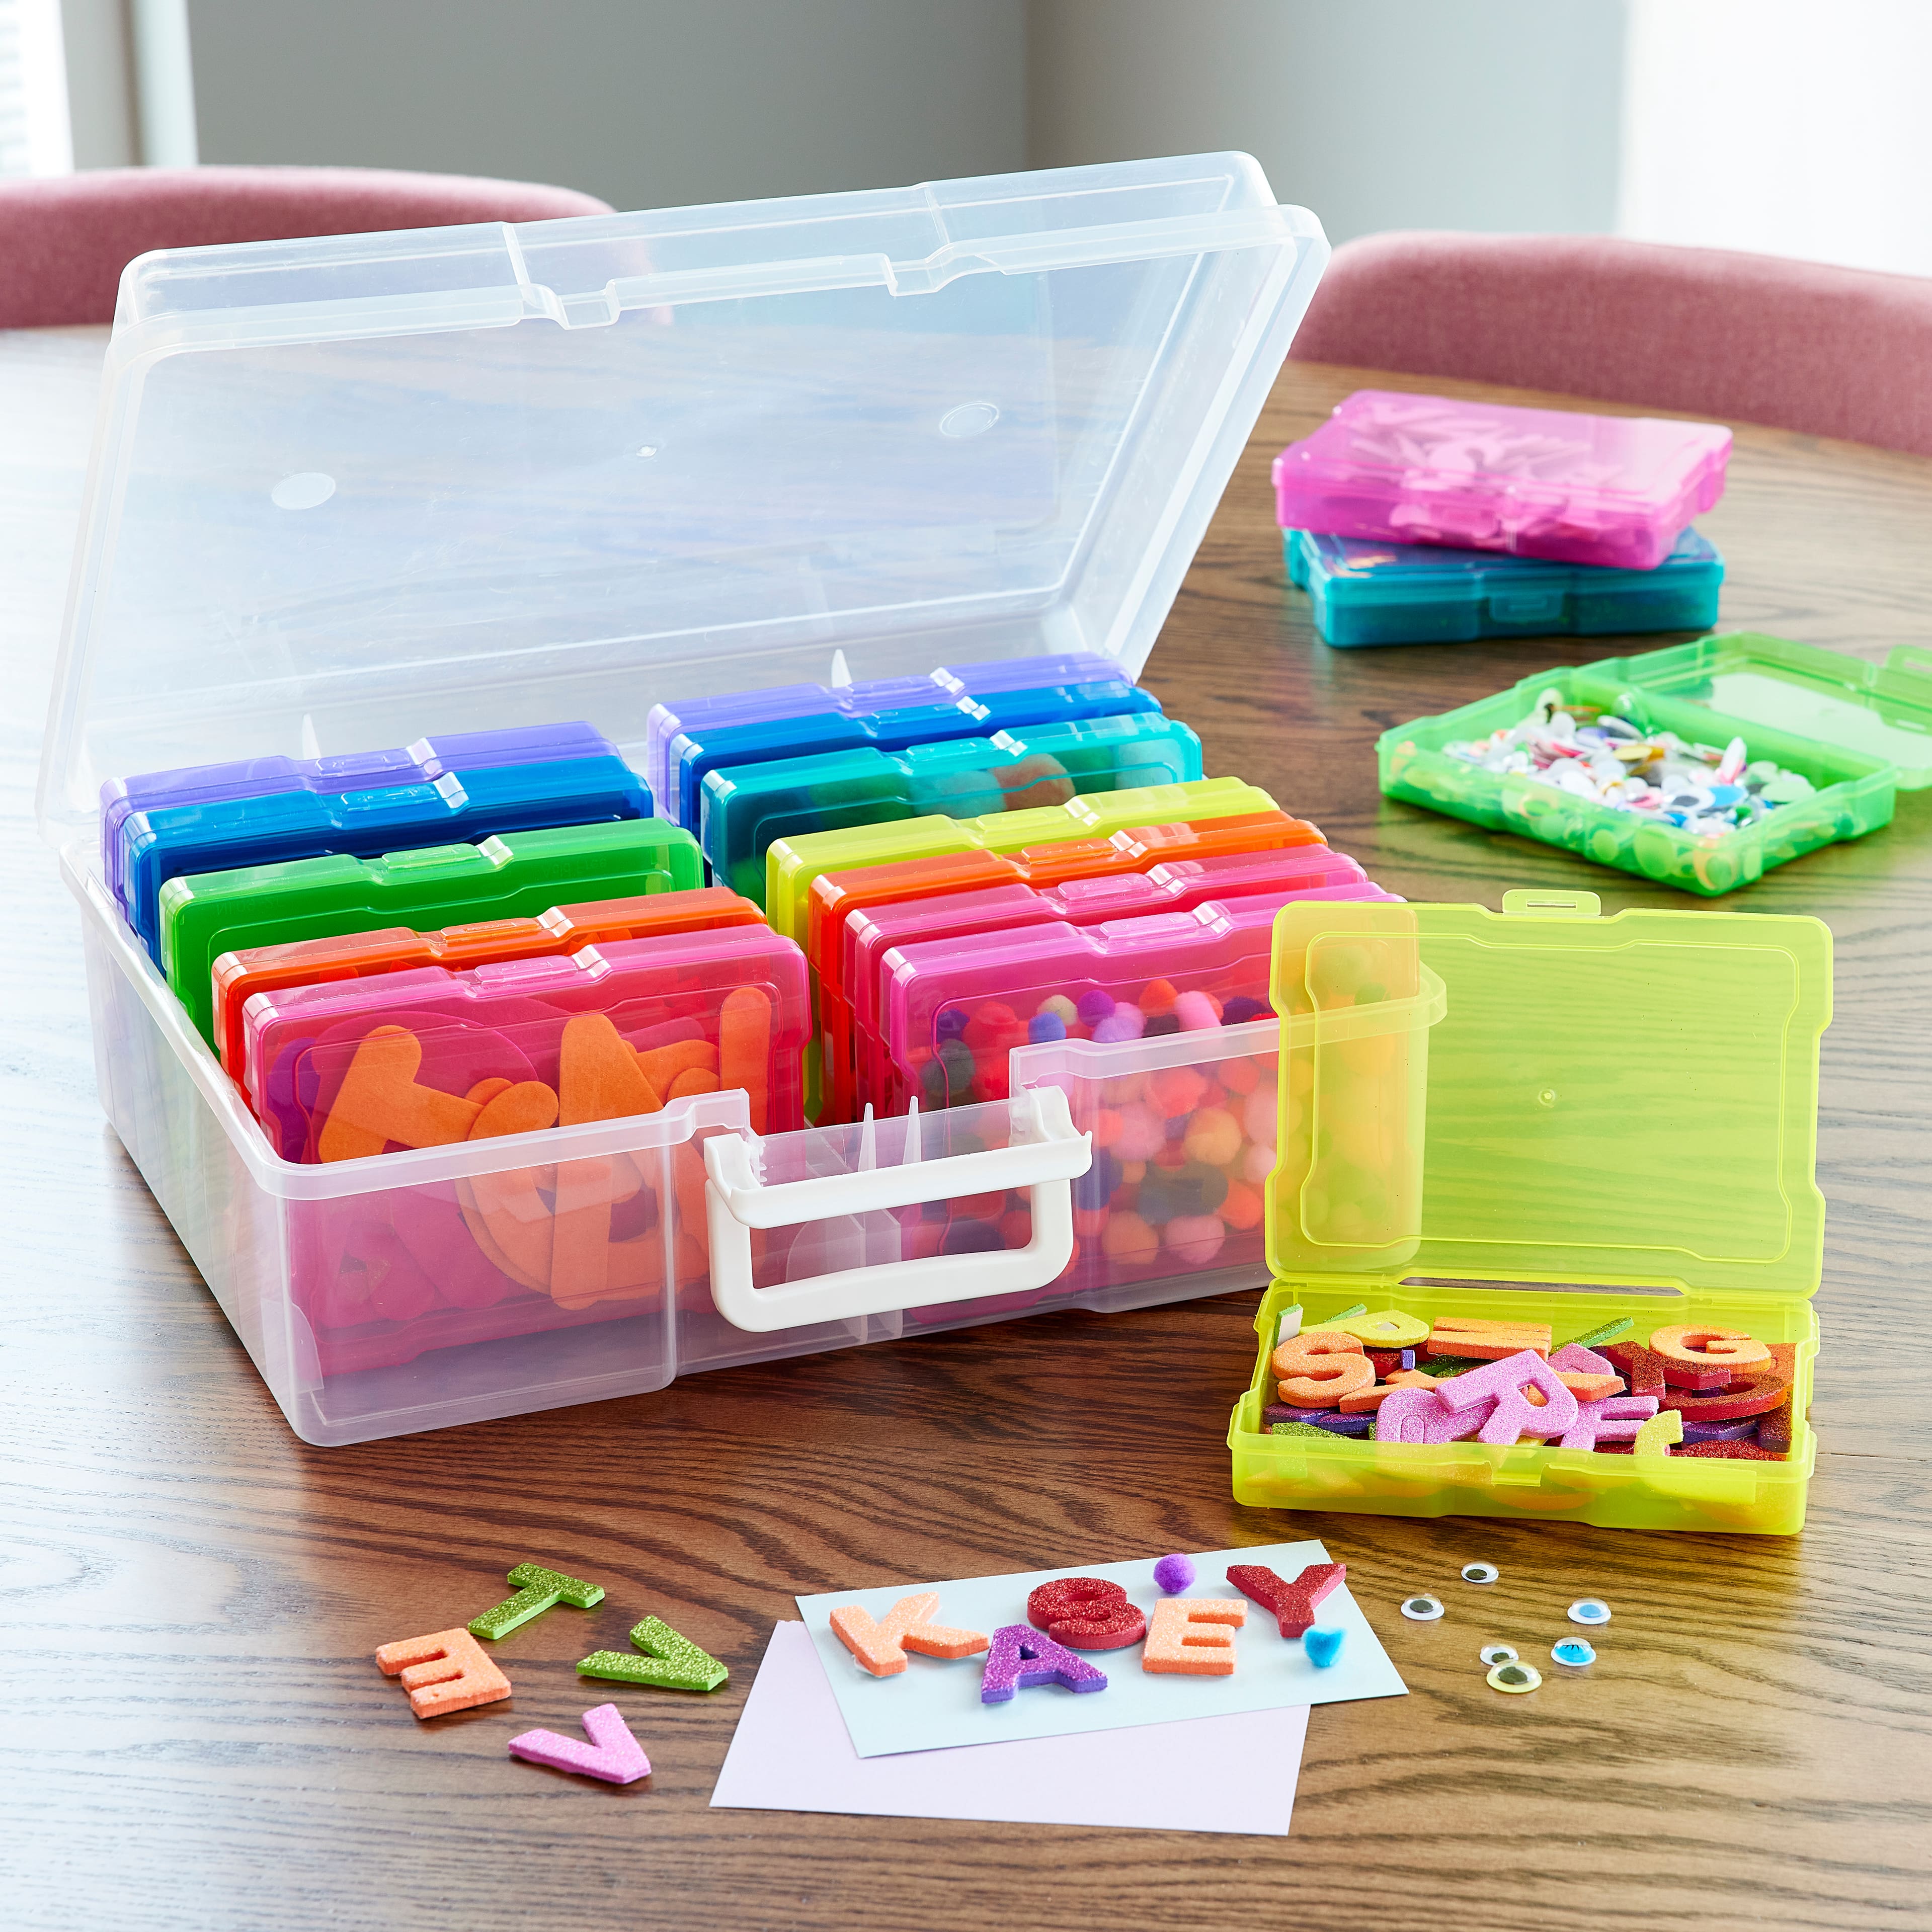 SIMPLY TIDY AT MICHAELS, I've been searching for the perfect storage  solutions to fit my personal crafting needs! #ad Well, the NEW Simply Tidy  Modular System from Michaels, By MeaghanMakes